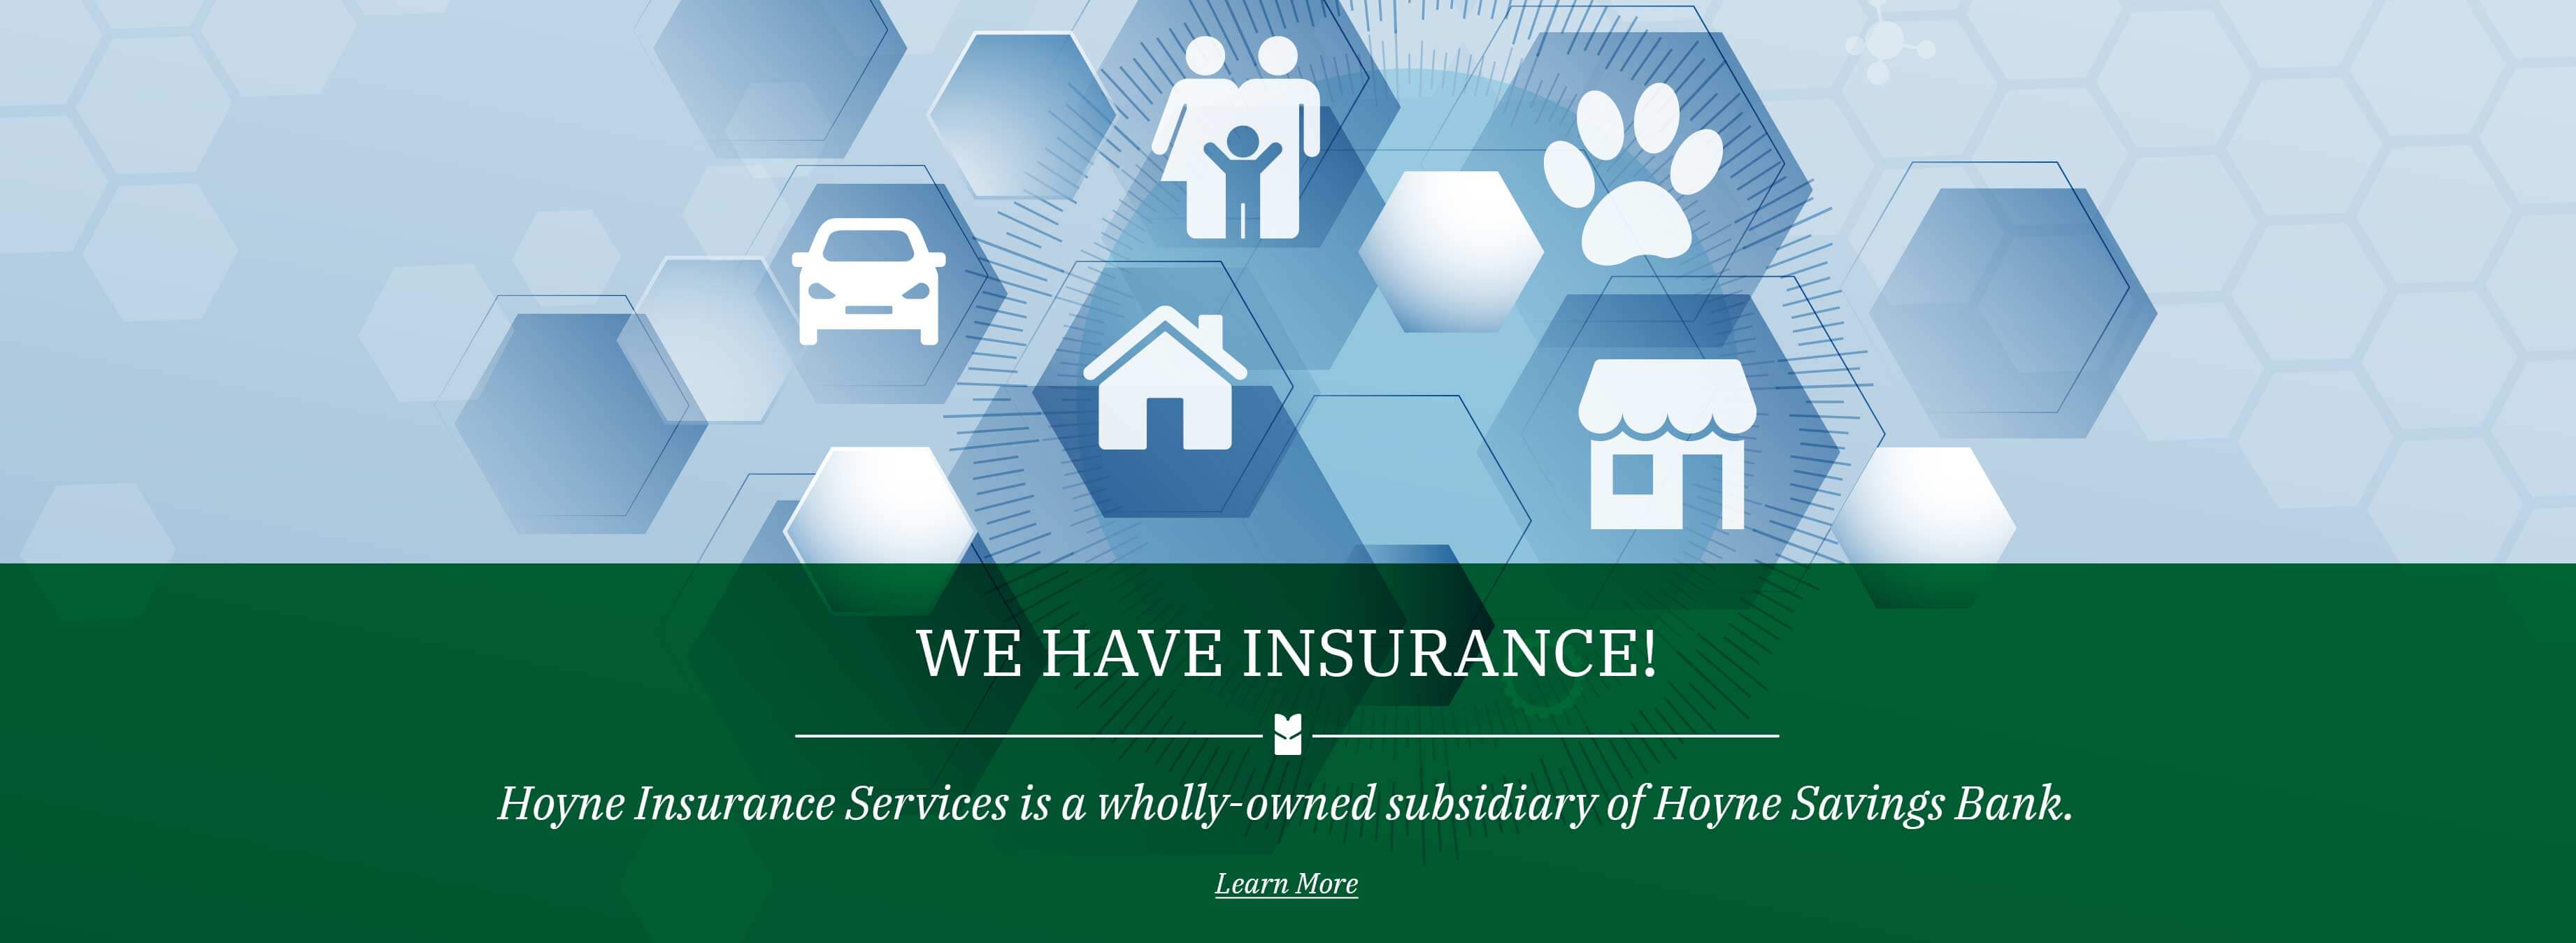 We have insurance! Hoyne Insurance Services is a wholly-owned subsidiary of Hoyne Savings Bank. Learn More